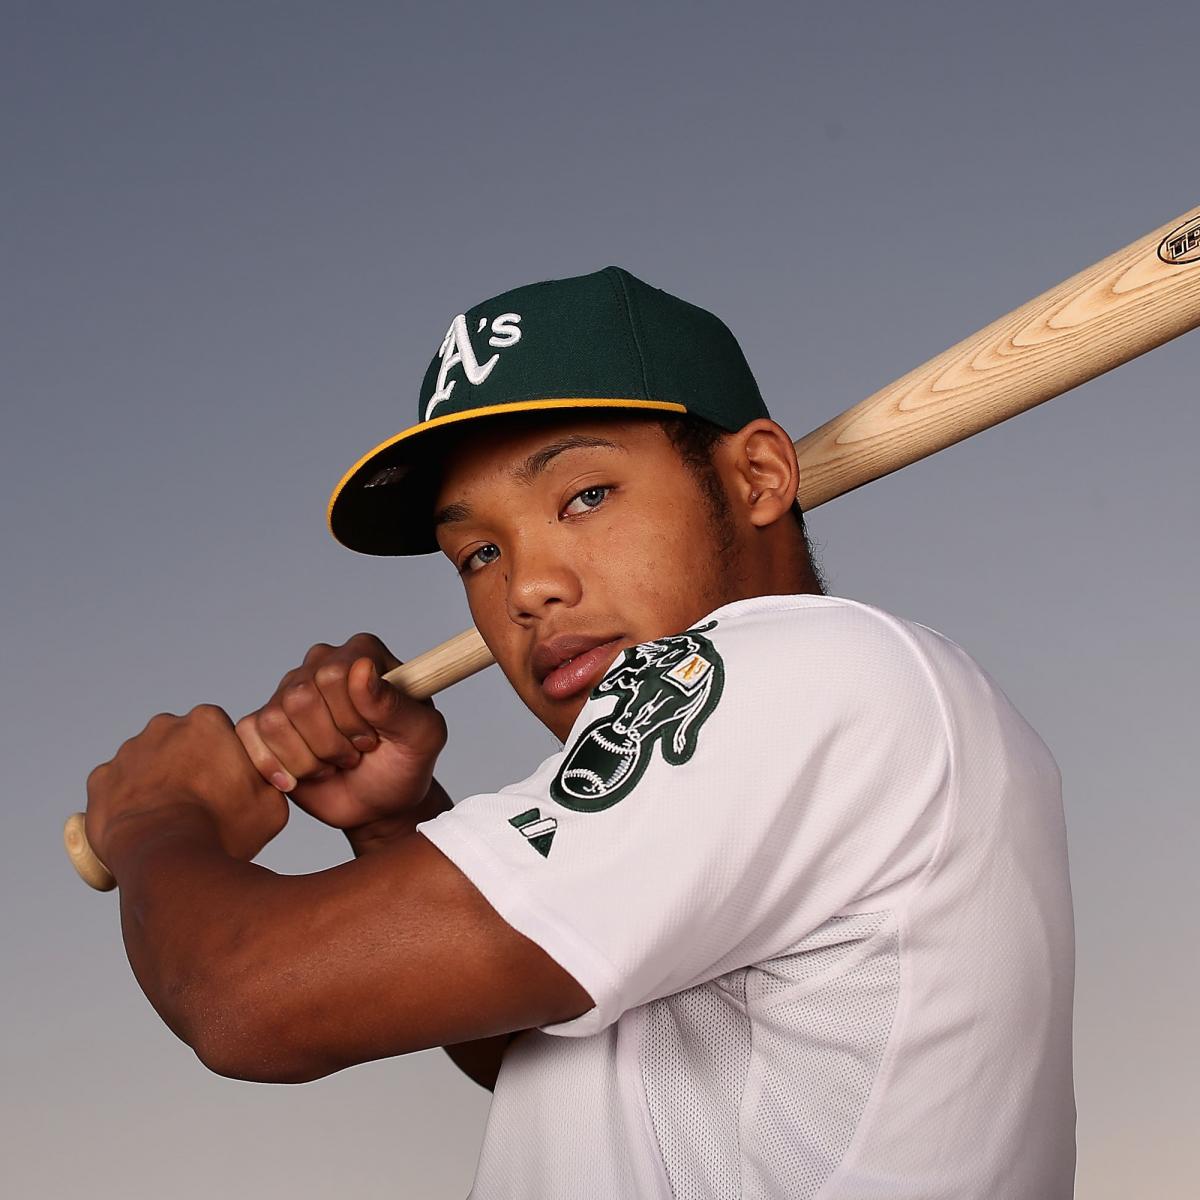 Oakland Athletics' Top 10 Prospects Rankings, Spring Forecasts News